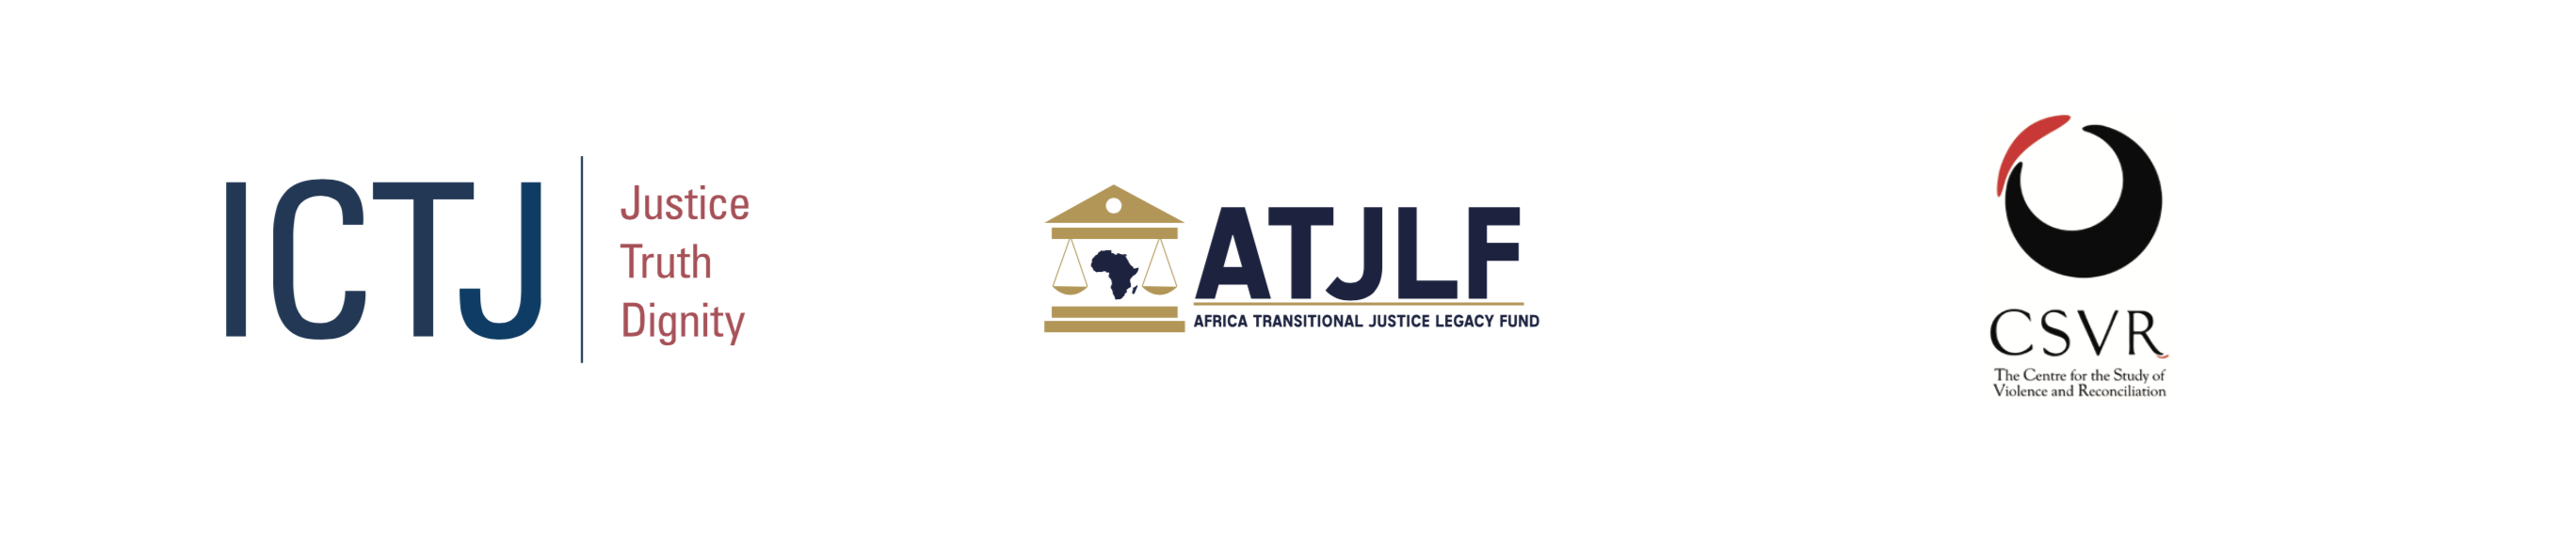 The logos of International Center for Transitional Justice (ICTJ), Africa Transitional Justice Legacy Fund (ATJLF), and The Centre for the Study of Violence and Reconciliation (CSVR)